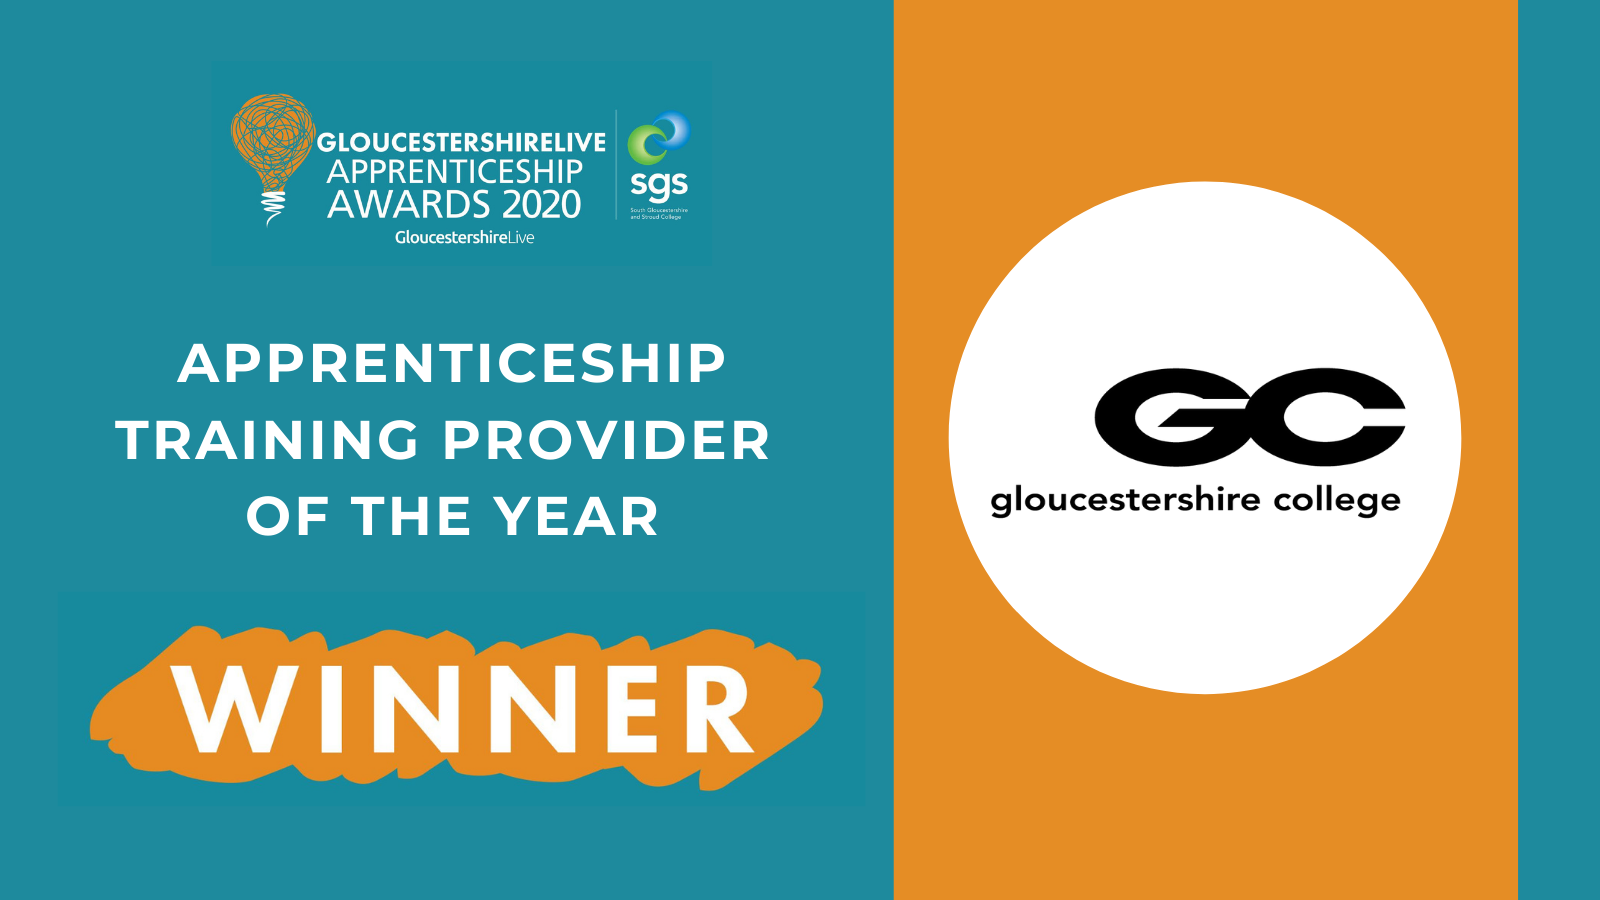 A double win for Gloucestershire College at Gloucestershire's Apprenticeship Awards 2020